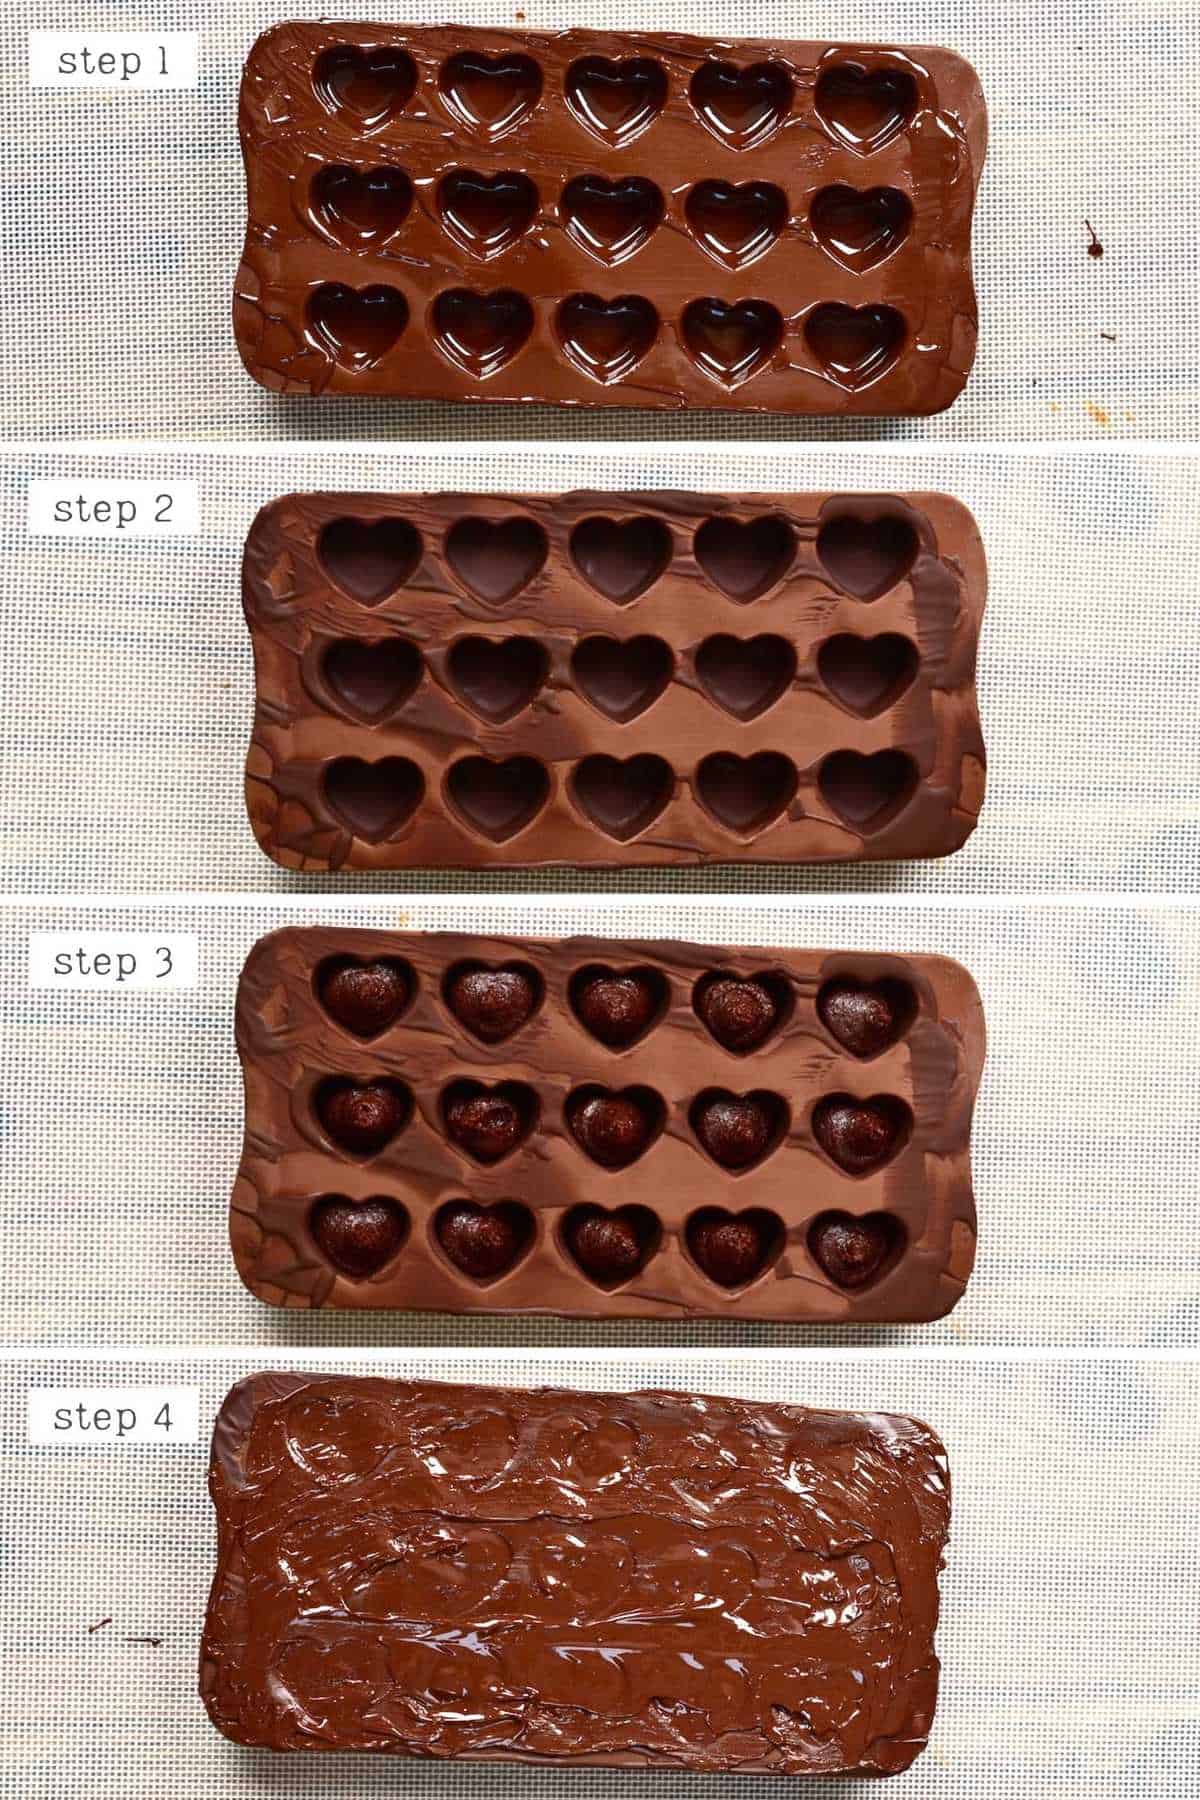 https://www.alphafoodie.com/wp-content/uploads/2021/01/Steps-for-making-chocolate-truffles.jpg